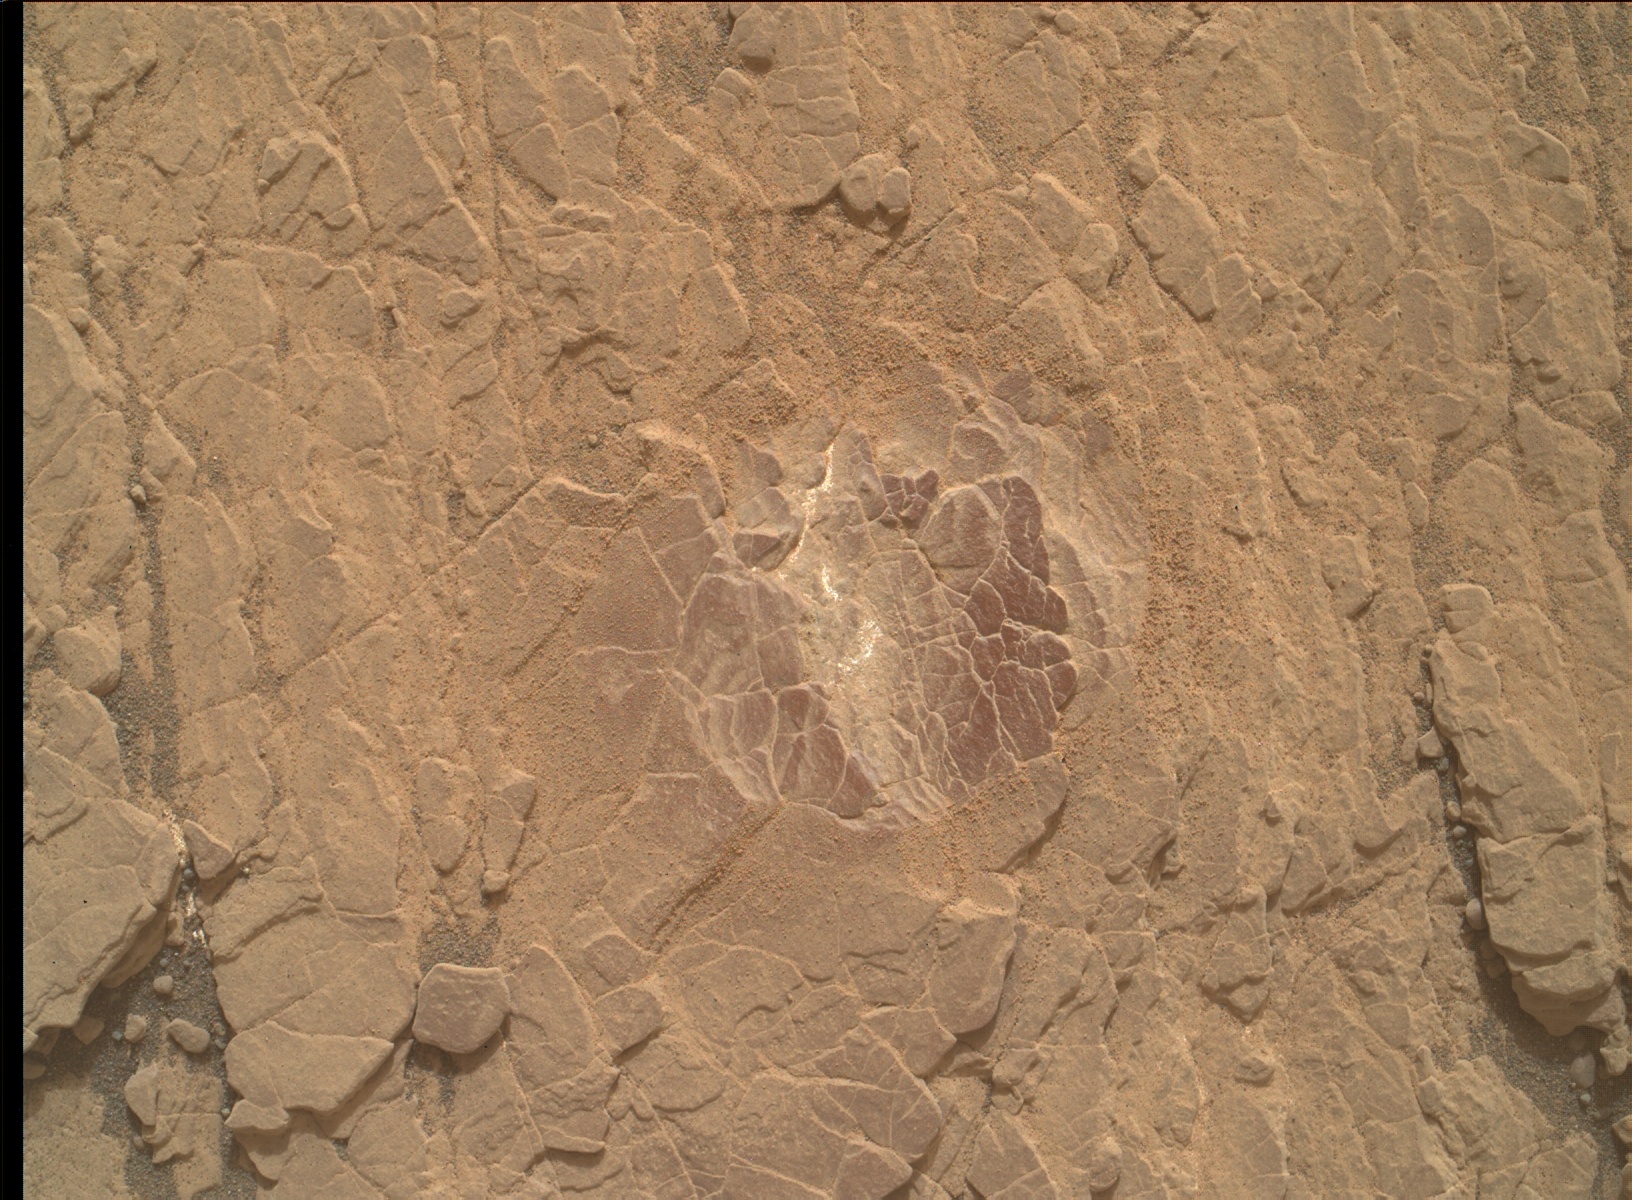 Nasa's Mars rover Curiosity acquired this image using its Mars Hand Lens Imager (MAHLI) on Sol 2339